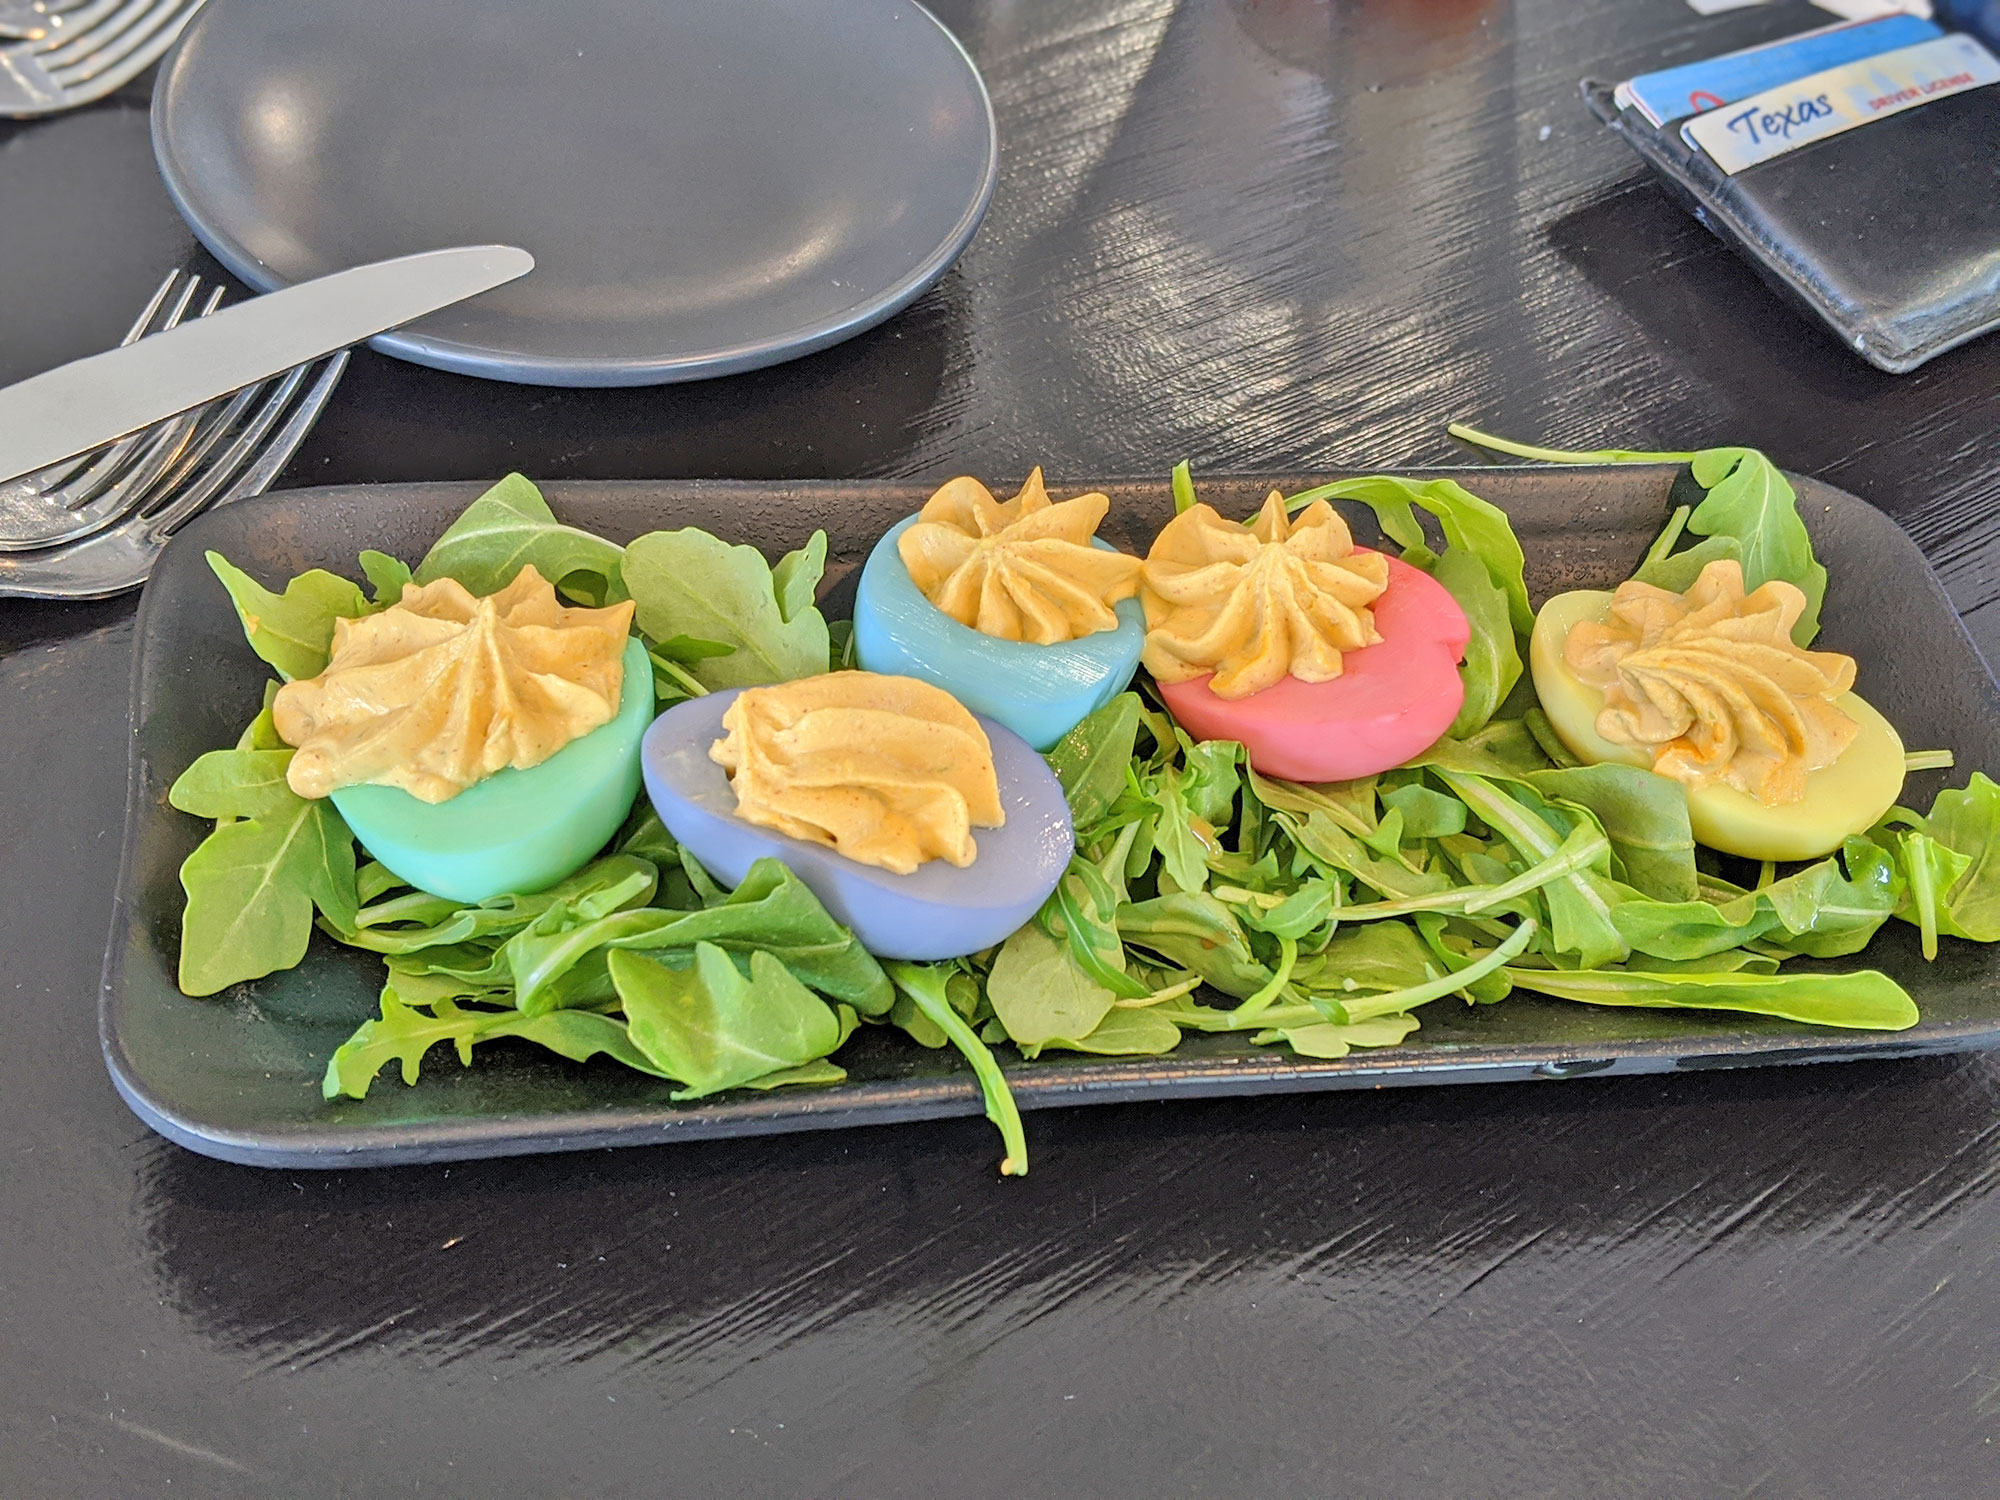 The deviled eggs brunch menu item at The Pines Rehoboth Beach.